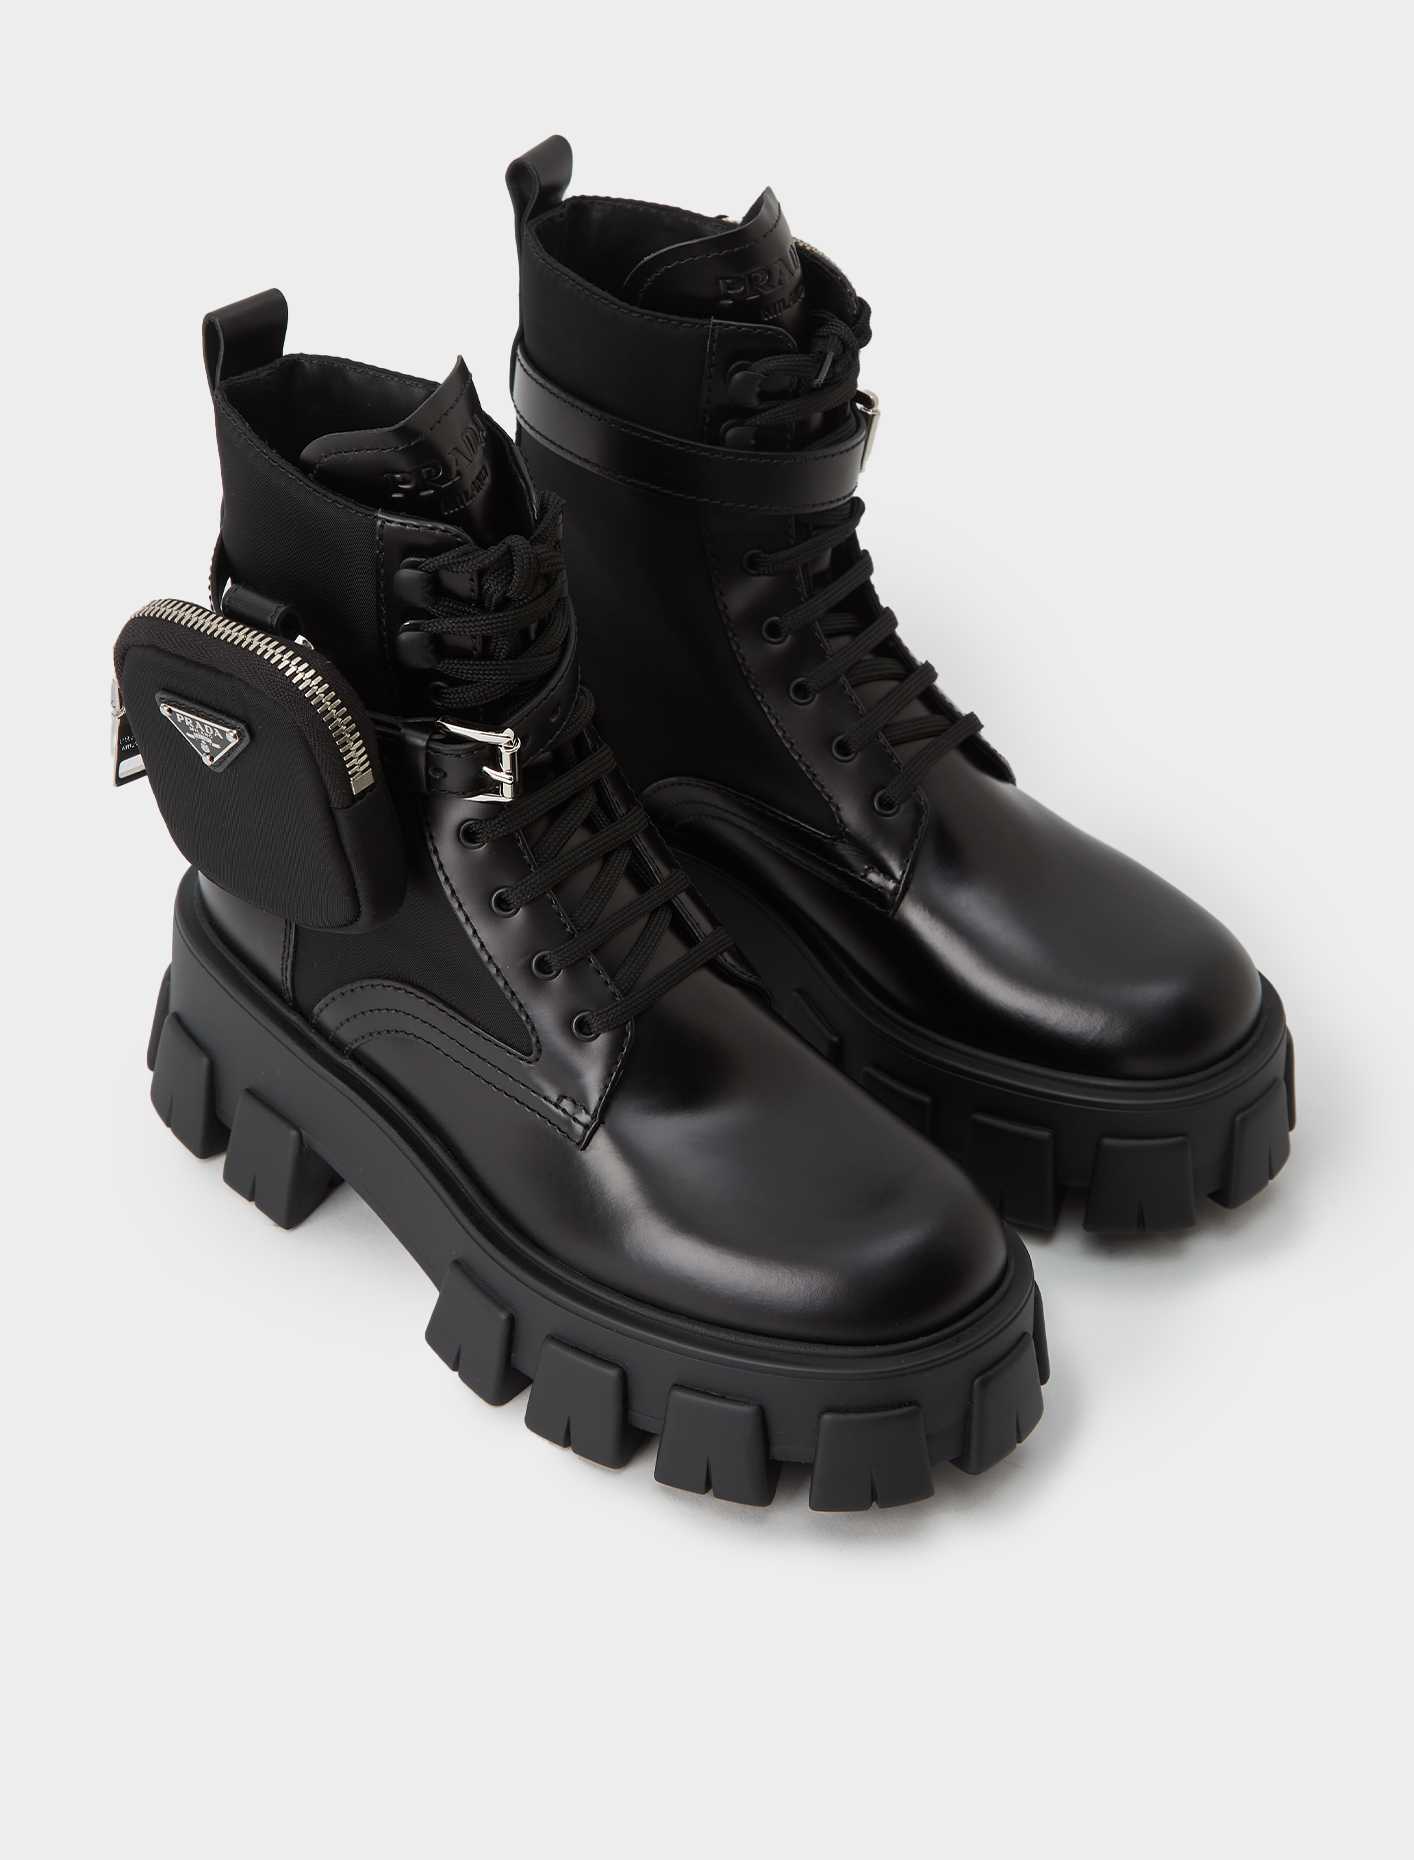 Prada Leather Combat Boots with Removable Nylon Pouch | Voo Store